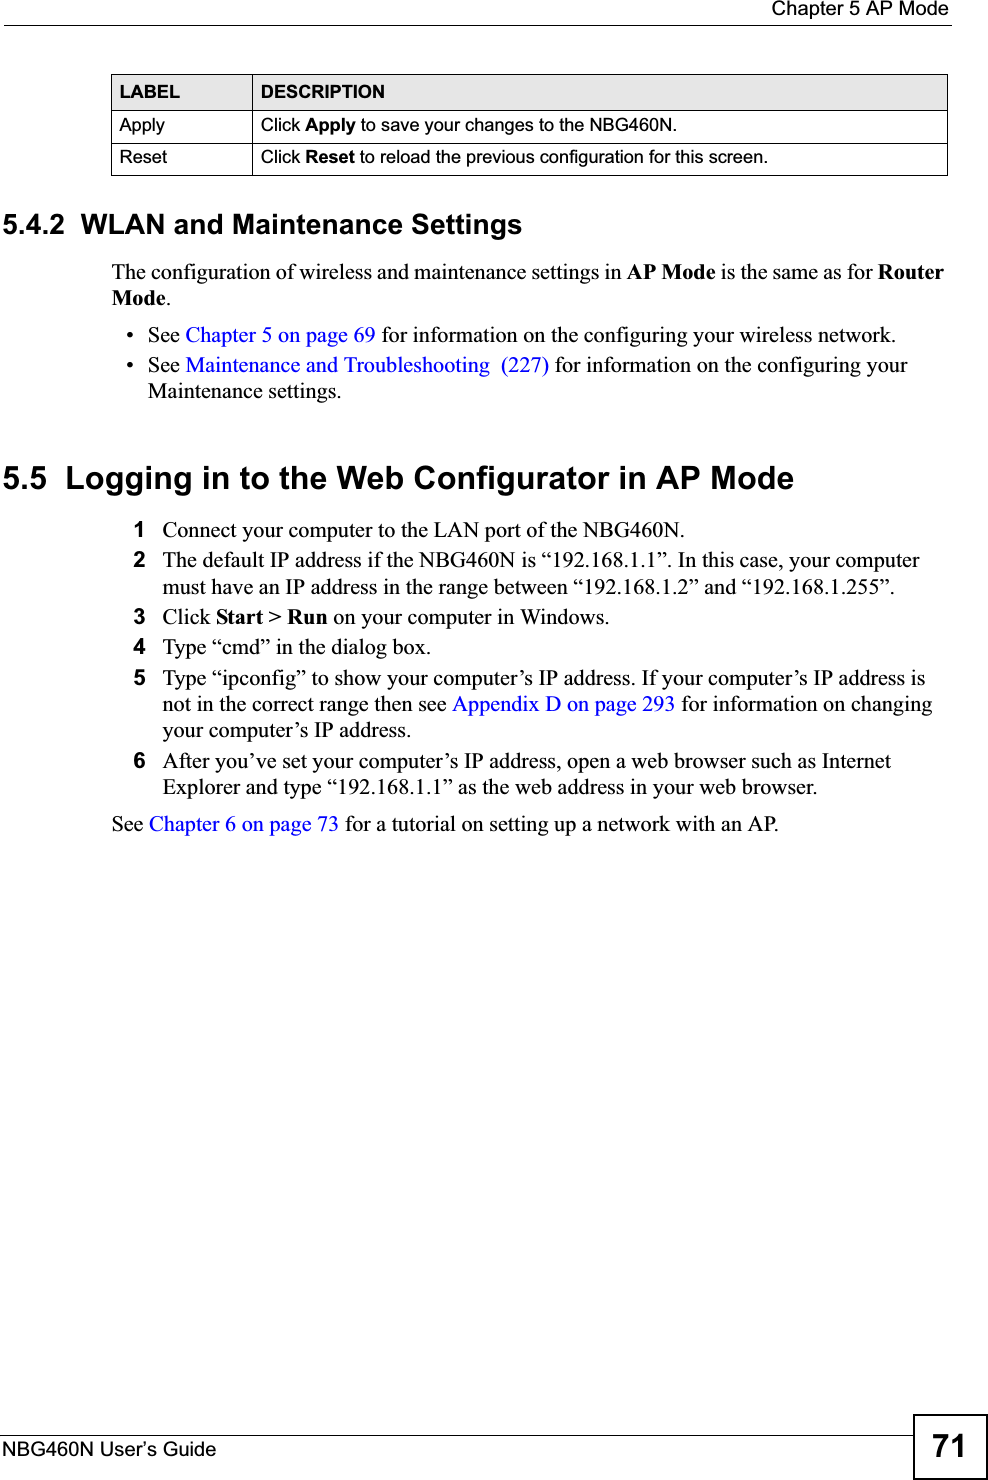  Chapter 5 AP ModeNBG460N User’s Guide 715.4.2  WLAN and Maintenance SettingsThe configuration of wireless and maintenance settings in AP Mode is the same as for RouterMode.• See Chapter 5 on page 69 for information on the configuring your wireless network.• See Maintenance and Troubleshooting  (227) for information on the configuring your Maintenance settings. 5.5  Logging in to the Web Configurator in AP Mode1Connect your computer to the LAN port of the NBG460N. 2The default IP address if the NBG460N is “192.168.1.1”. In this case, your computer must have an IP address in the range between “192.168.1.2” and “192.168.1.255”.3Click Start &gt; Run on your computer in Windows. 4Type “cmd” in the dialog box.5Type “ipconfig” to show your computer’s IP address. If your computer’s IP address is not in the correct range then see Appendix D on page 293 for information on changing your computer’s IP address.6After you’ve set your computer’s IP address, open a web browser such as Internet Explorer and type “192.168.1.1” as the web address in your web browser.See Chapter 6 on page 73 for a tutorial on setting up a network with an AP.Apply Click Apply to save your changes to the NBG460N.Reset Click Reset to reload the previous configuration for this screen.LABEL DESCRIPTION